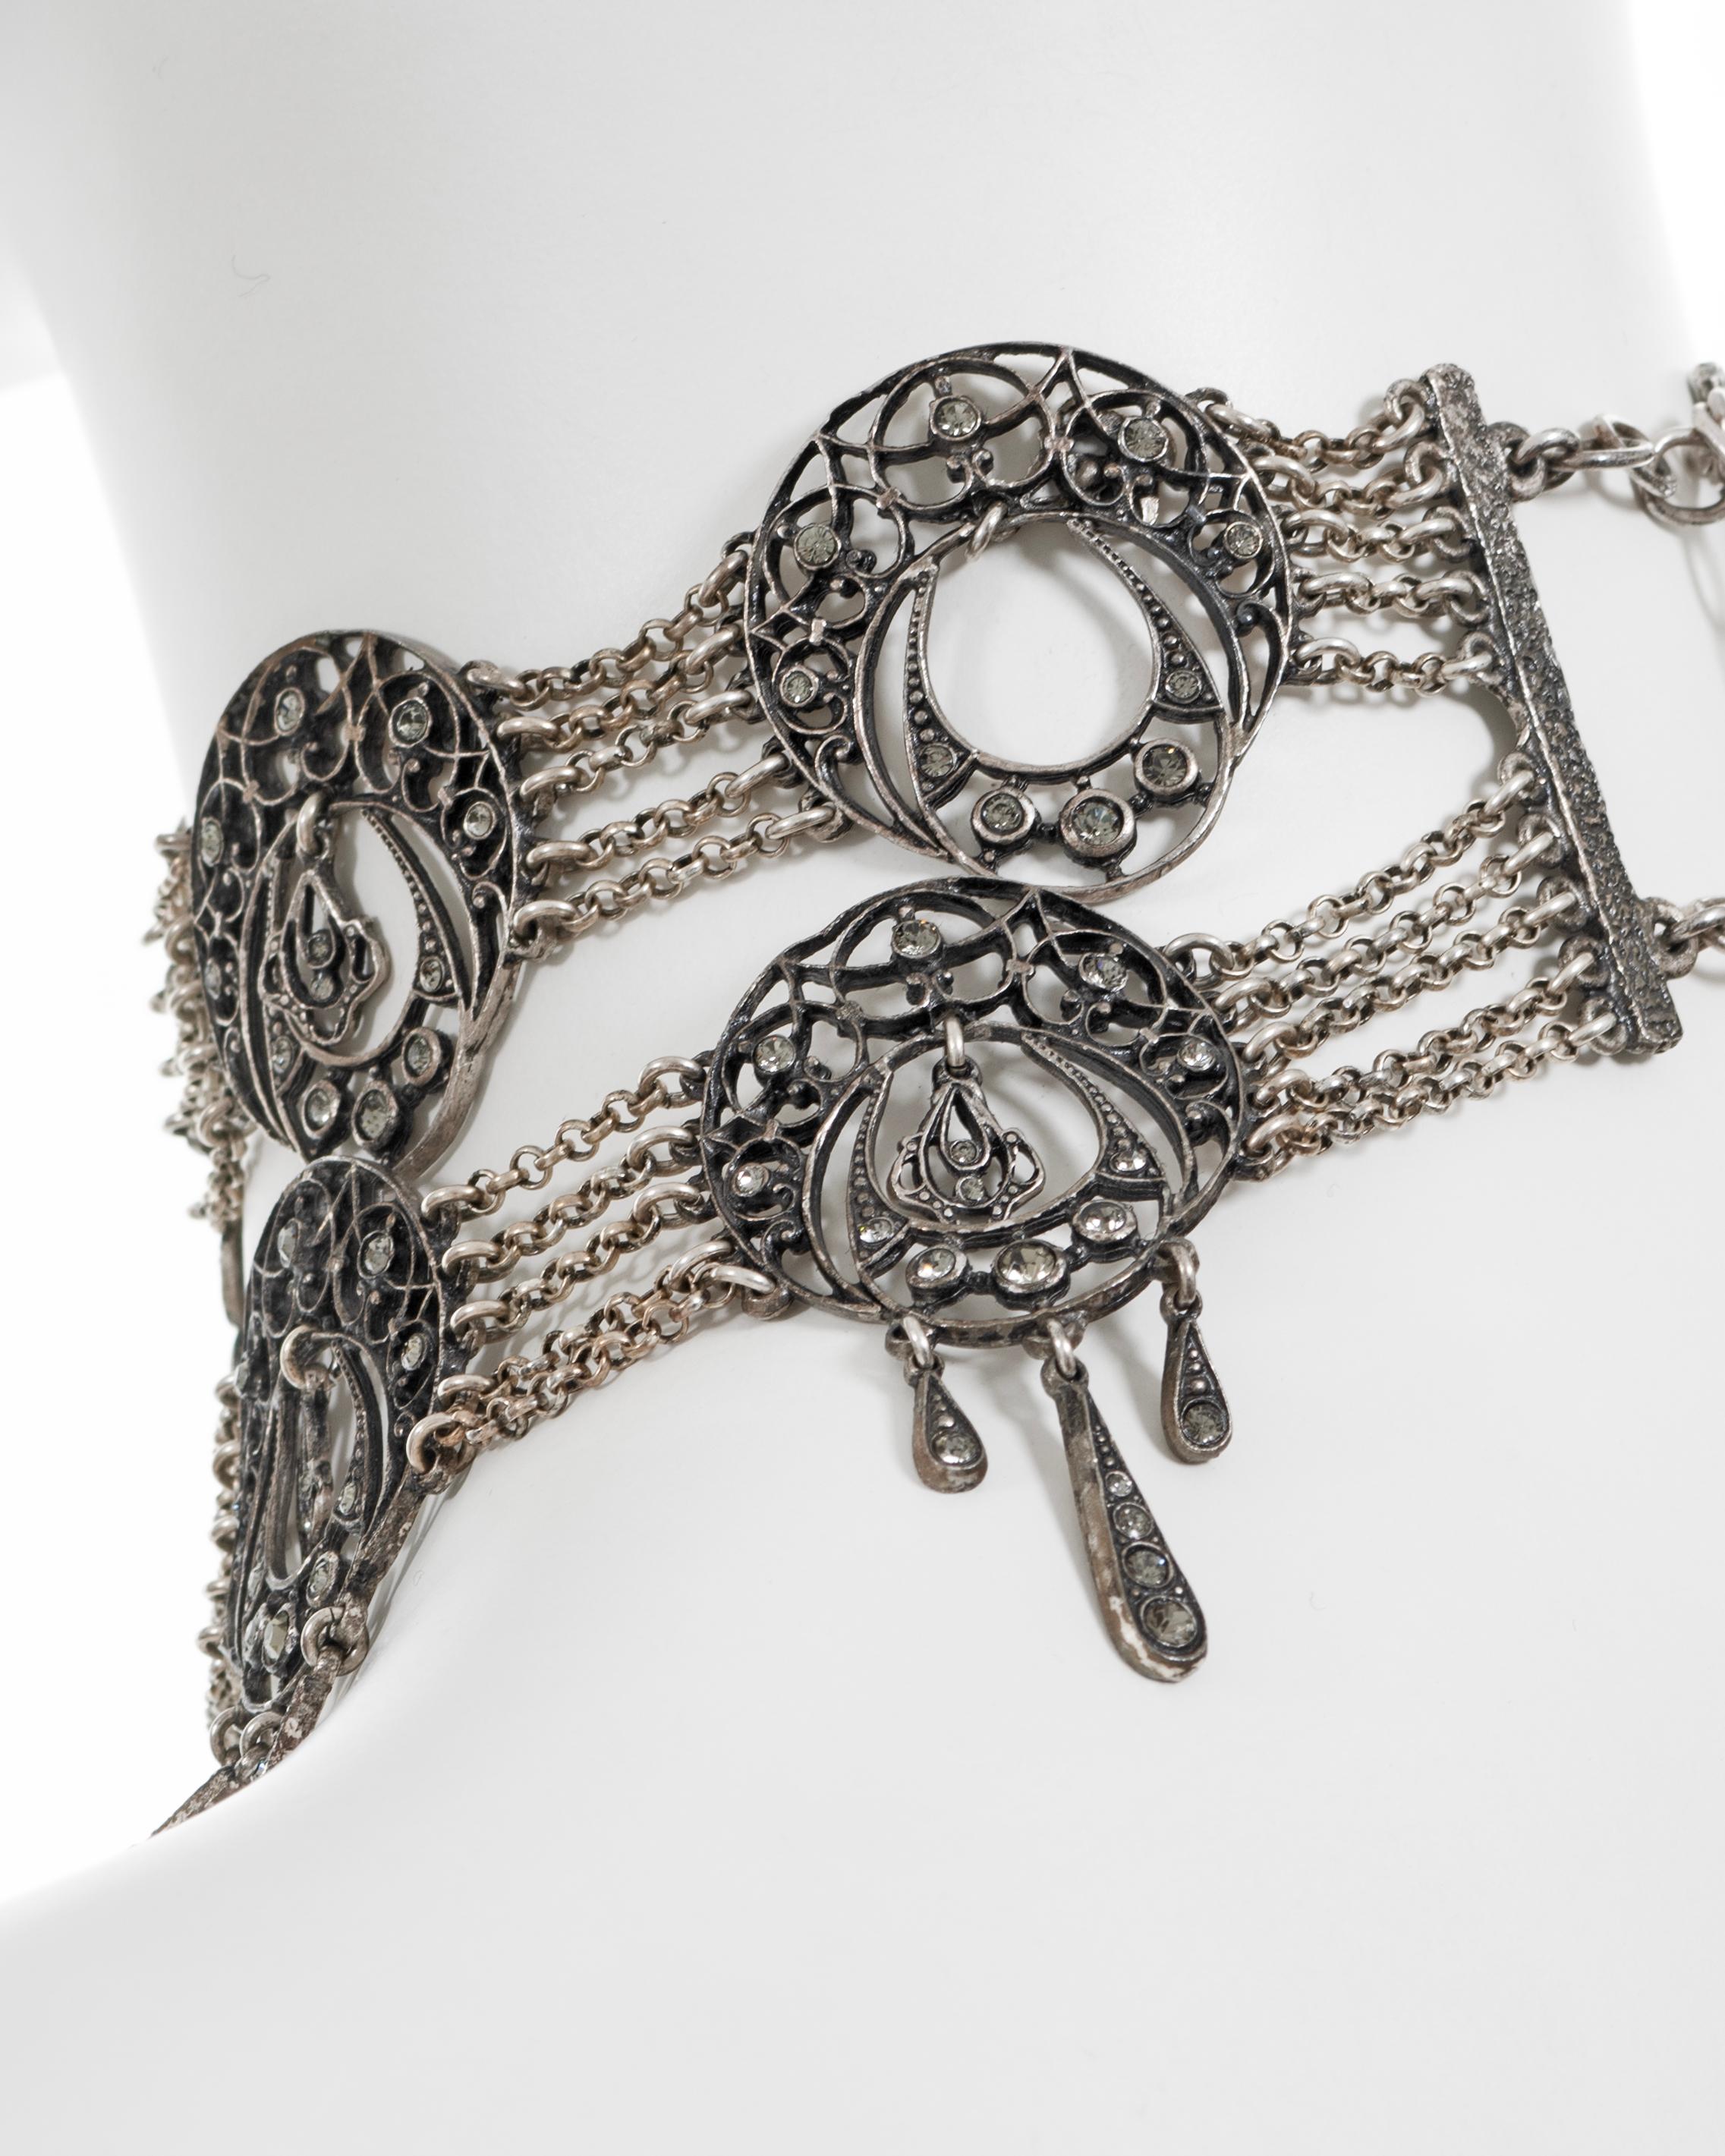 Christian Dior by John Galliano antique-style filigree choker necklace, ss 1999 For Sale 5